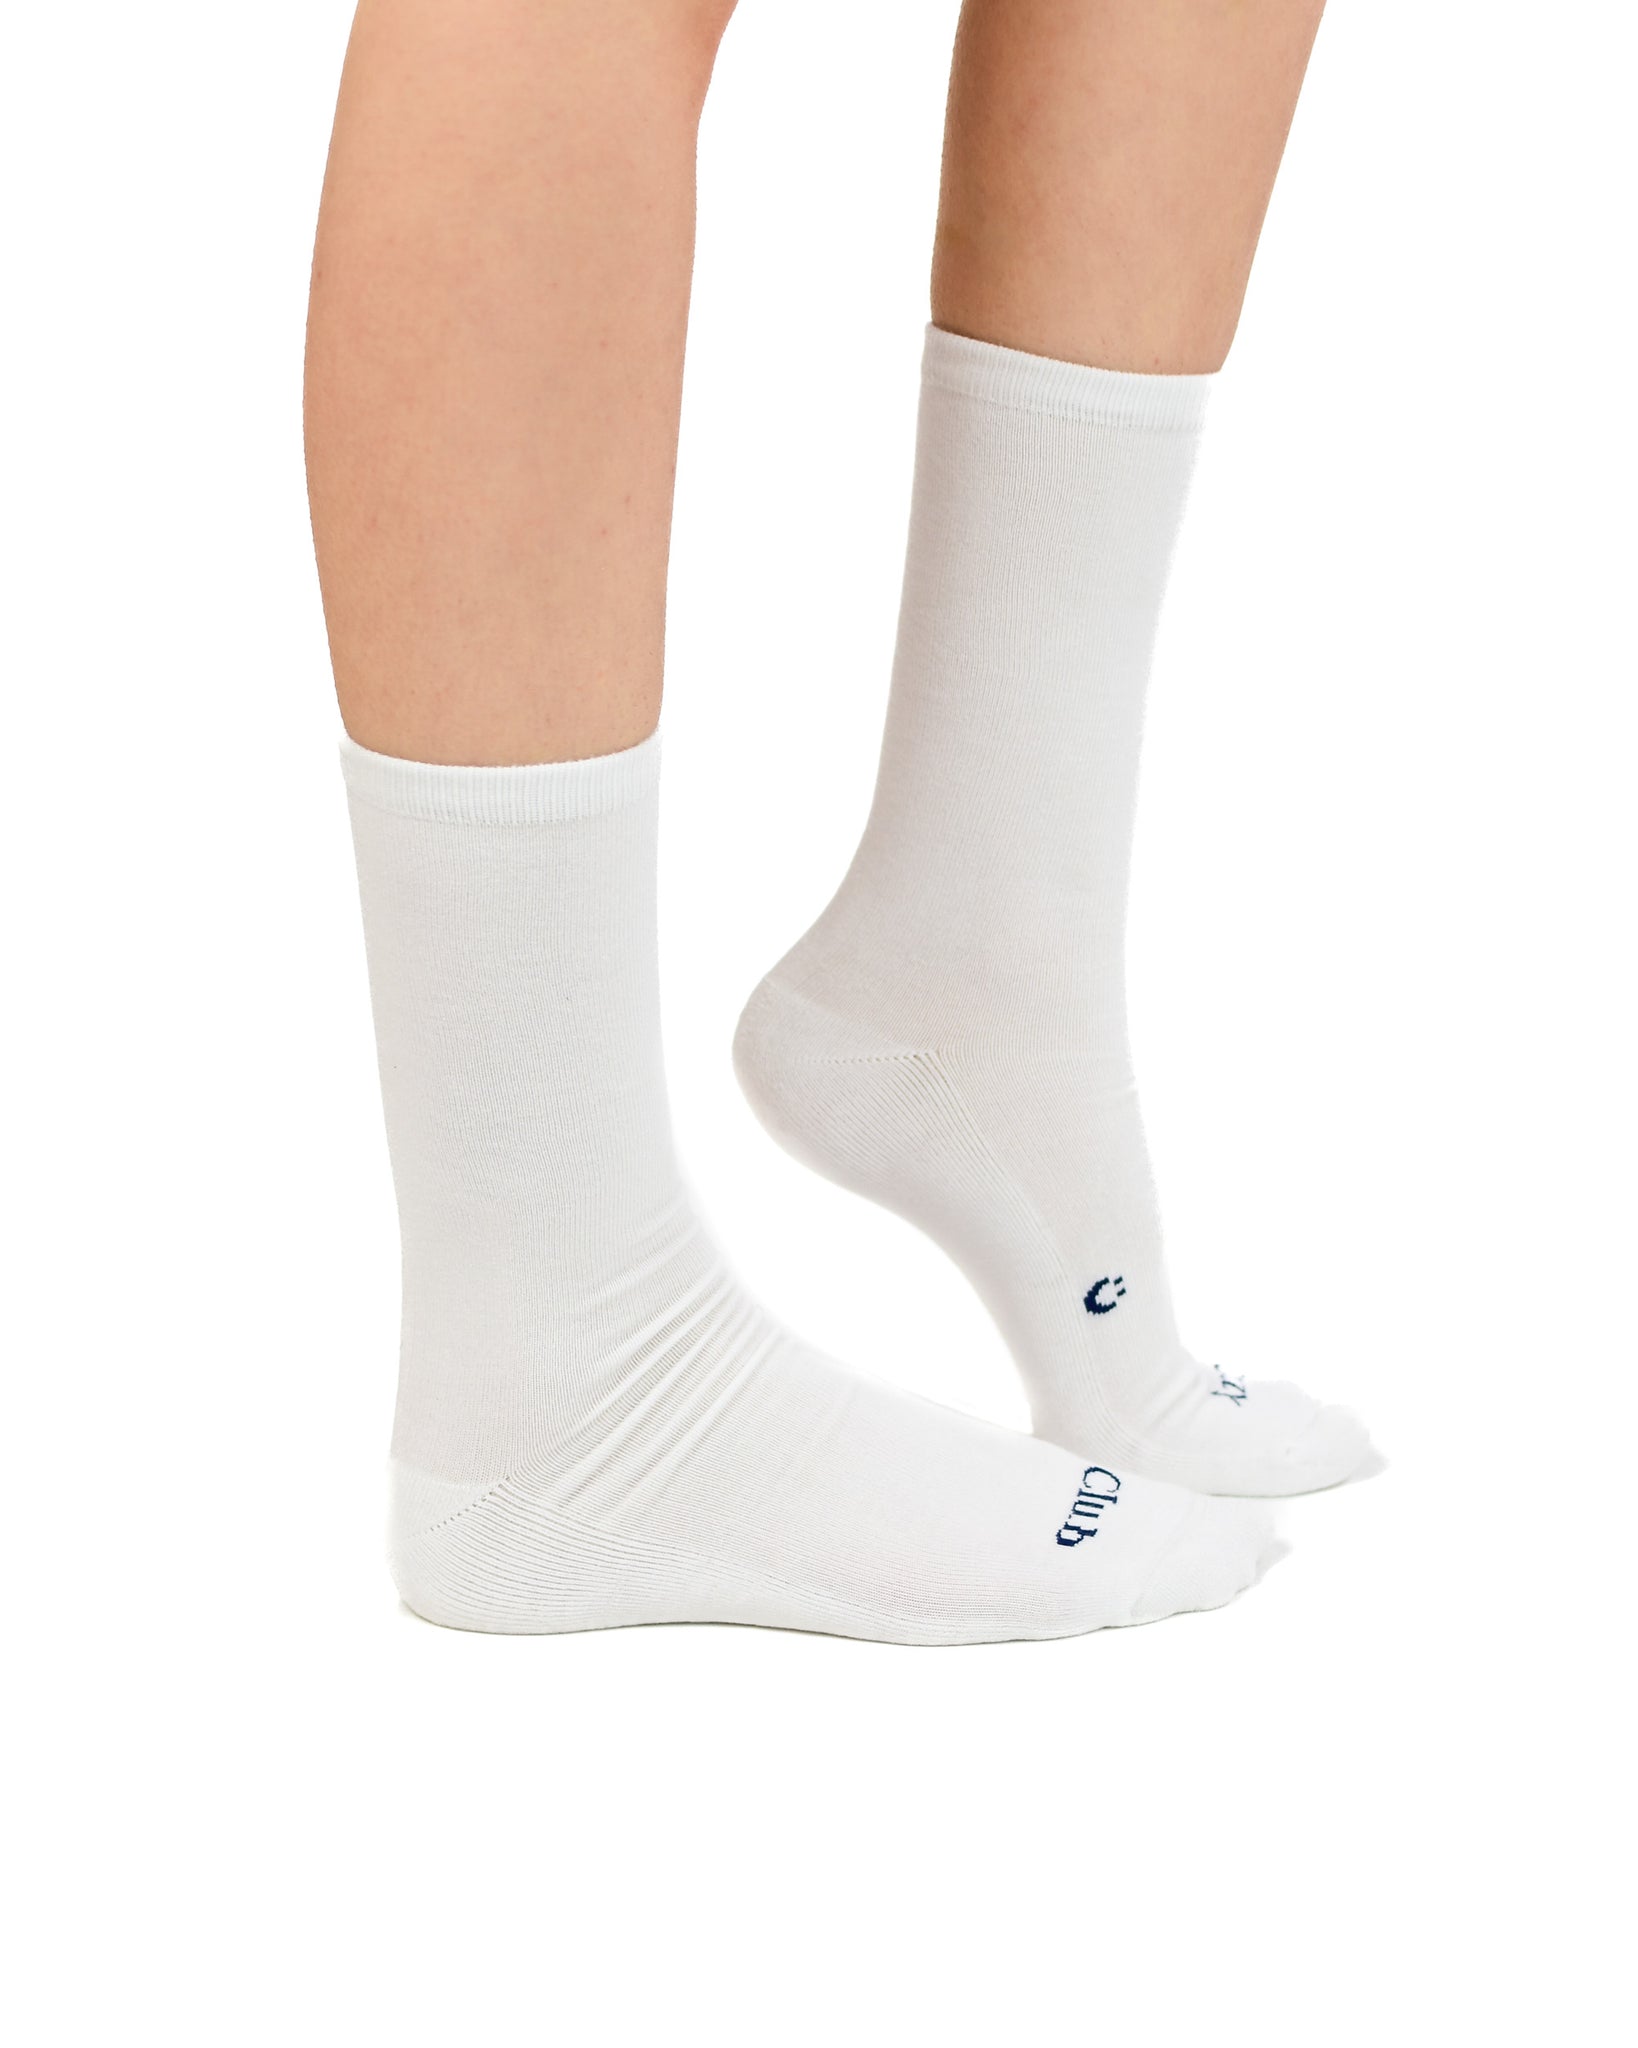 Everyday Crew Seamless Feel Sock 4 Pack (Adults) - Icicle/White